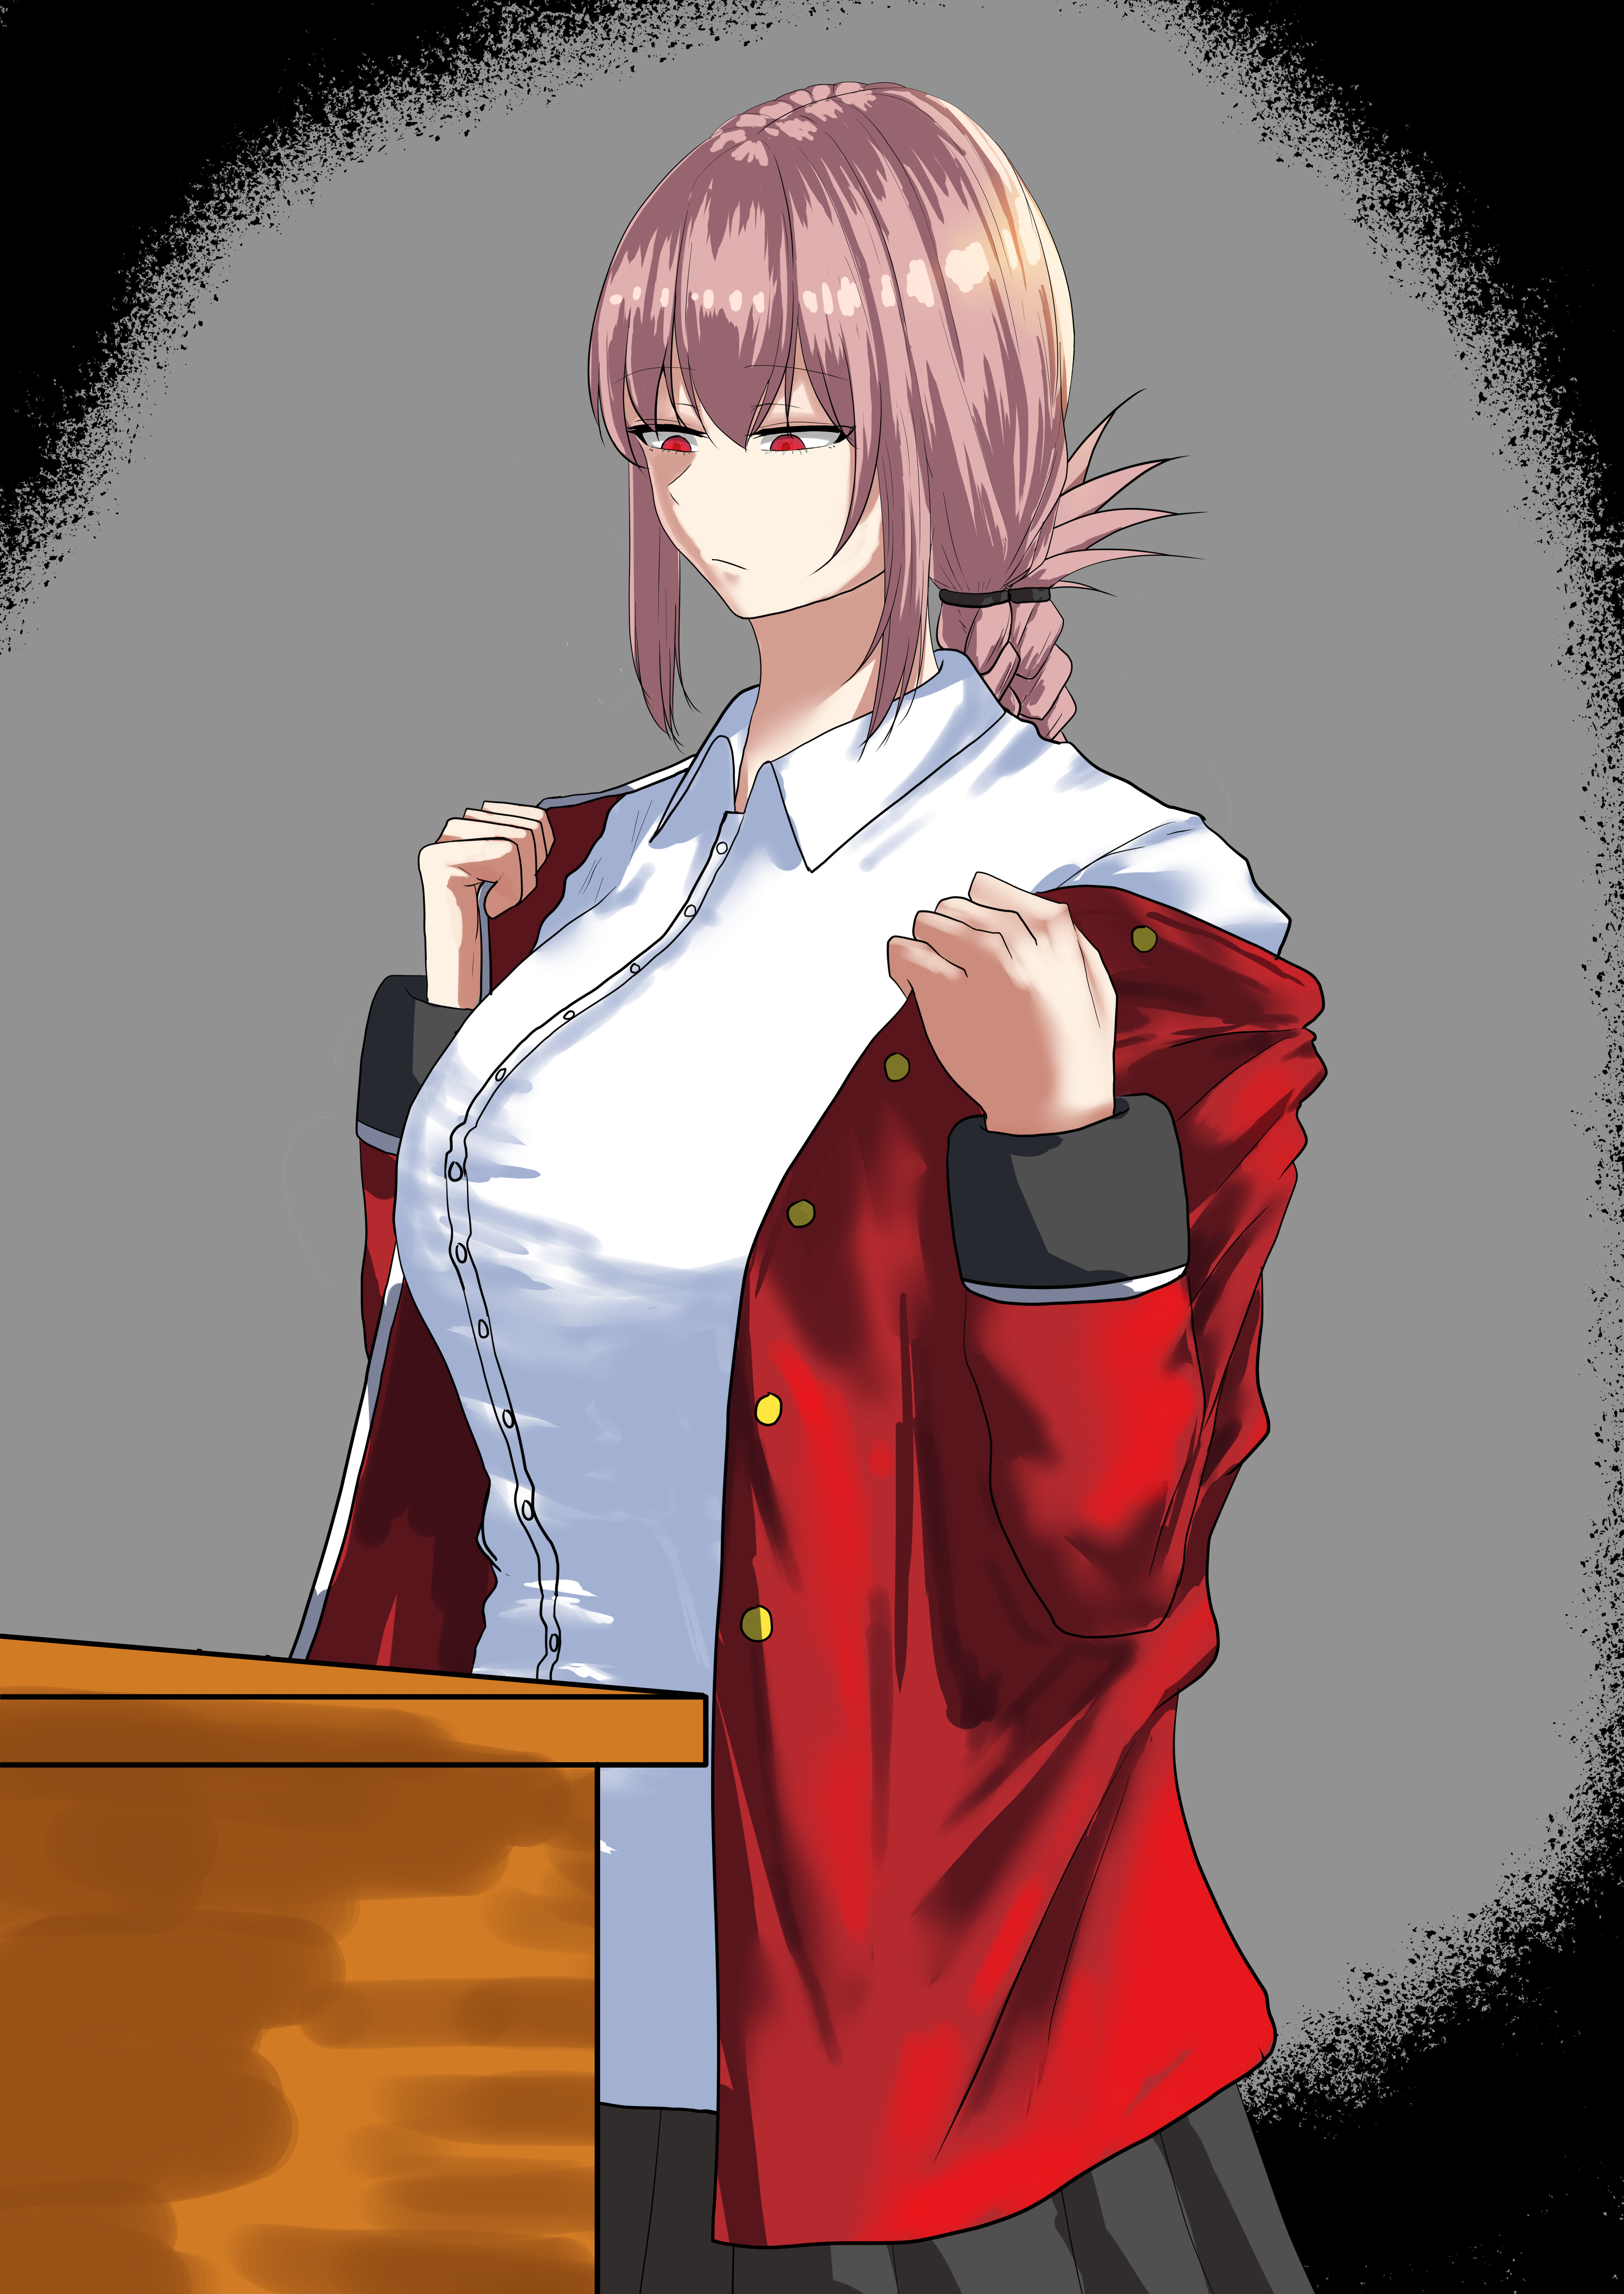 Anime Anime Girls Fate Series Fate Grand Order Florence Nightingale Fate Grand Order Long Hair Blond 4657x6577